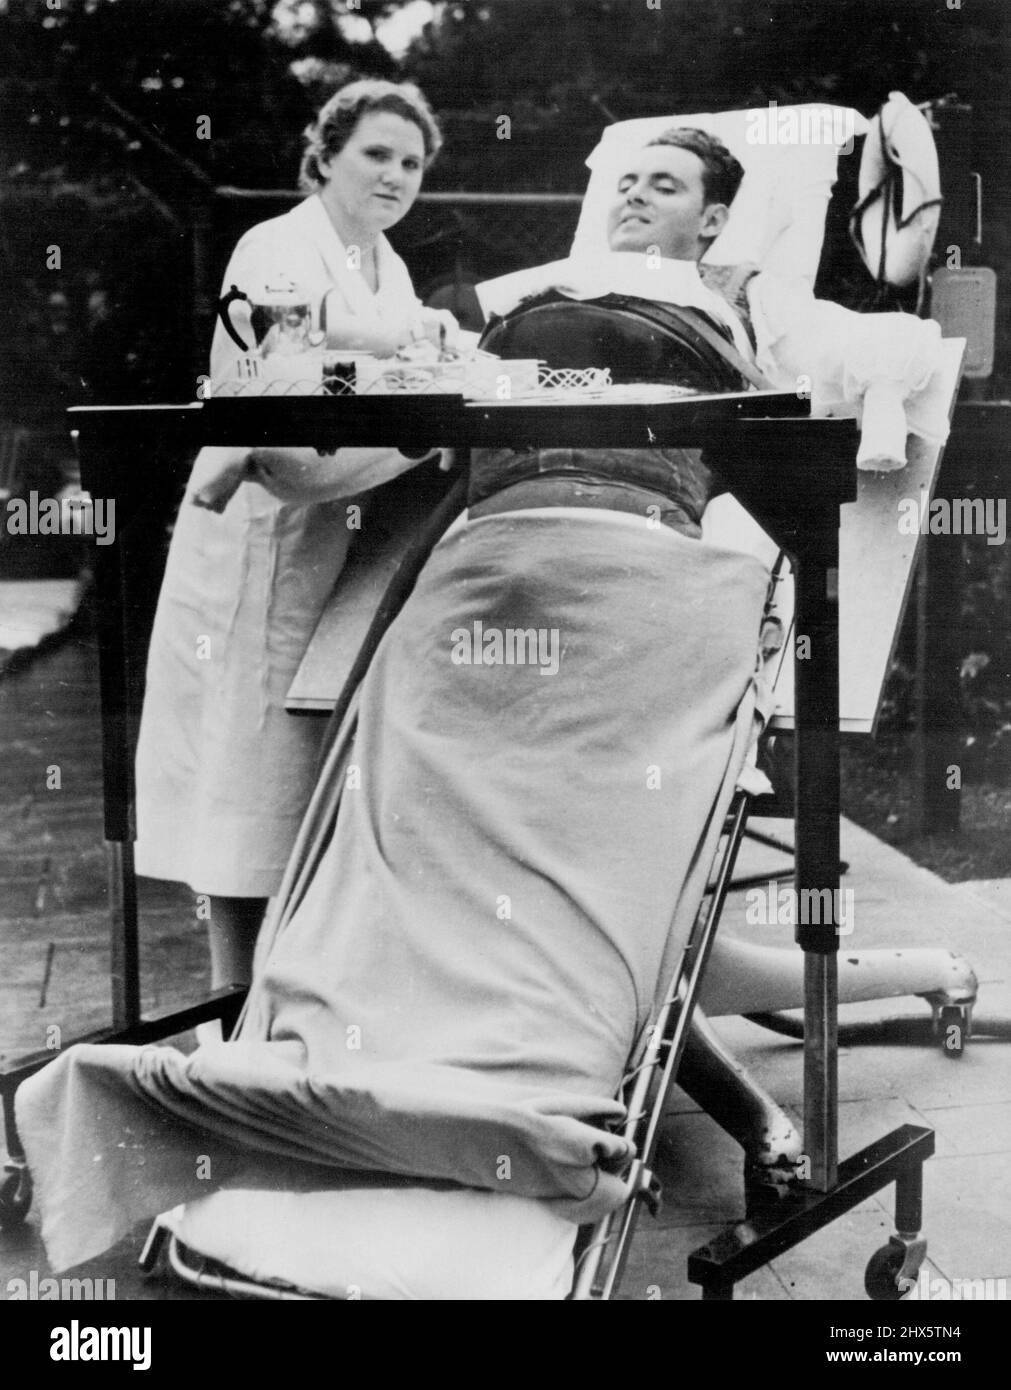 Snite Now Uses 'Vest Lung' - Frederick B. Snite, Chicago Financier's son who has been paralyzed by infantile paralysis for more than two years, in the New lightweight 'Vest Lung' which fits over the chest alone, that has replaced the 'Iron Lung' in which he was brought home from China, where he was stricken. He leaves Chicago Oct. 25 for the family home in Florida to spend the winter. October 25, 1938. (Photo by Acme). Stock Photo